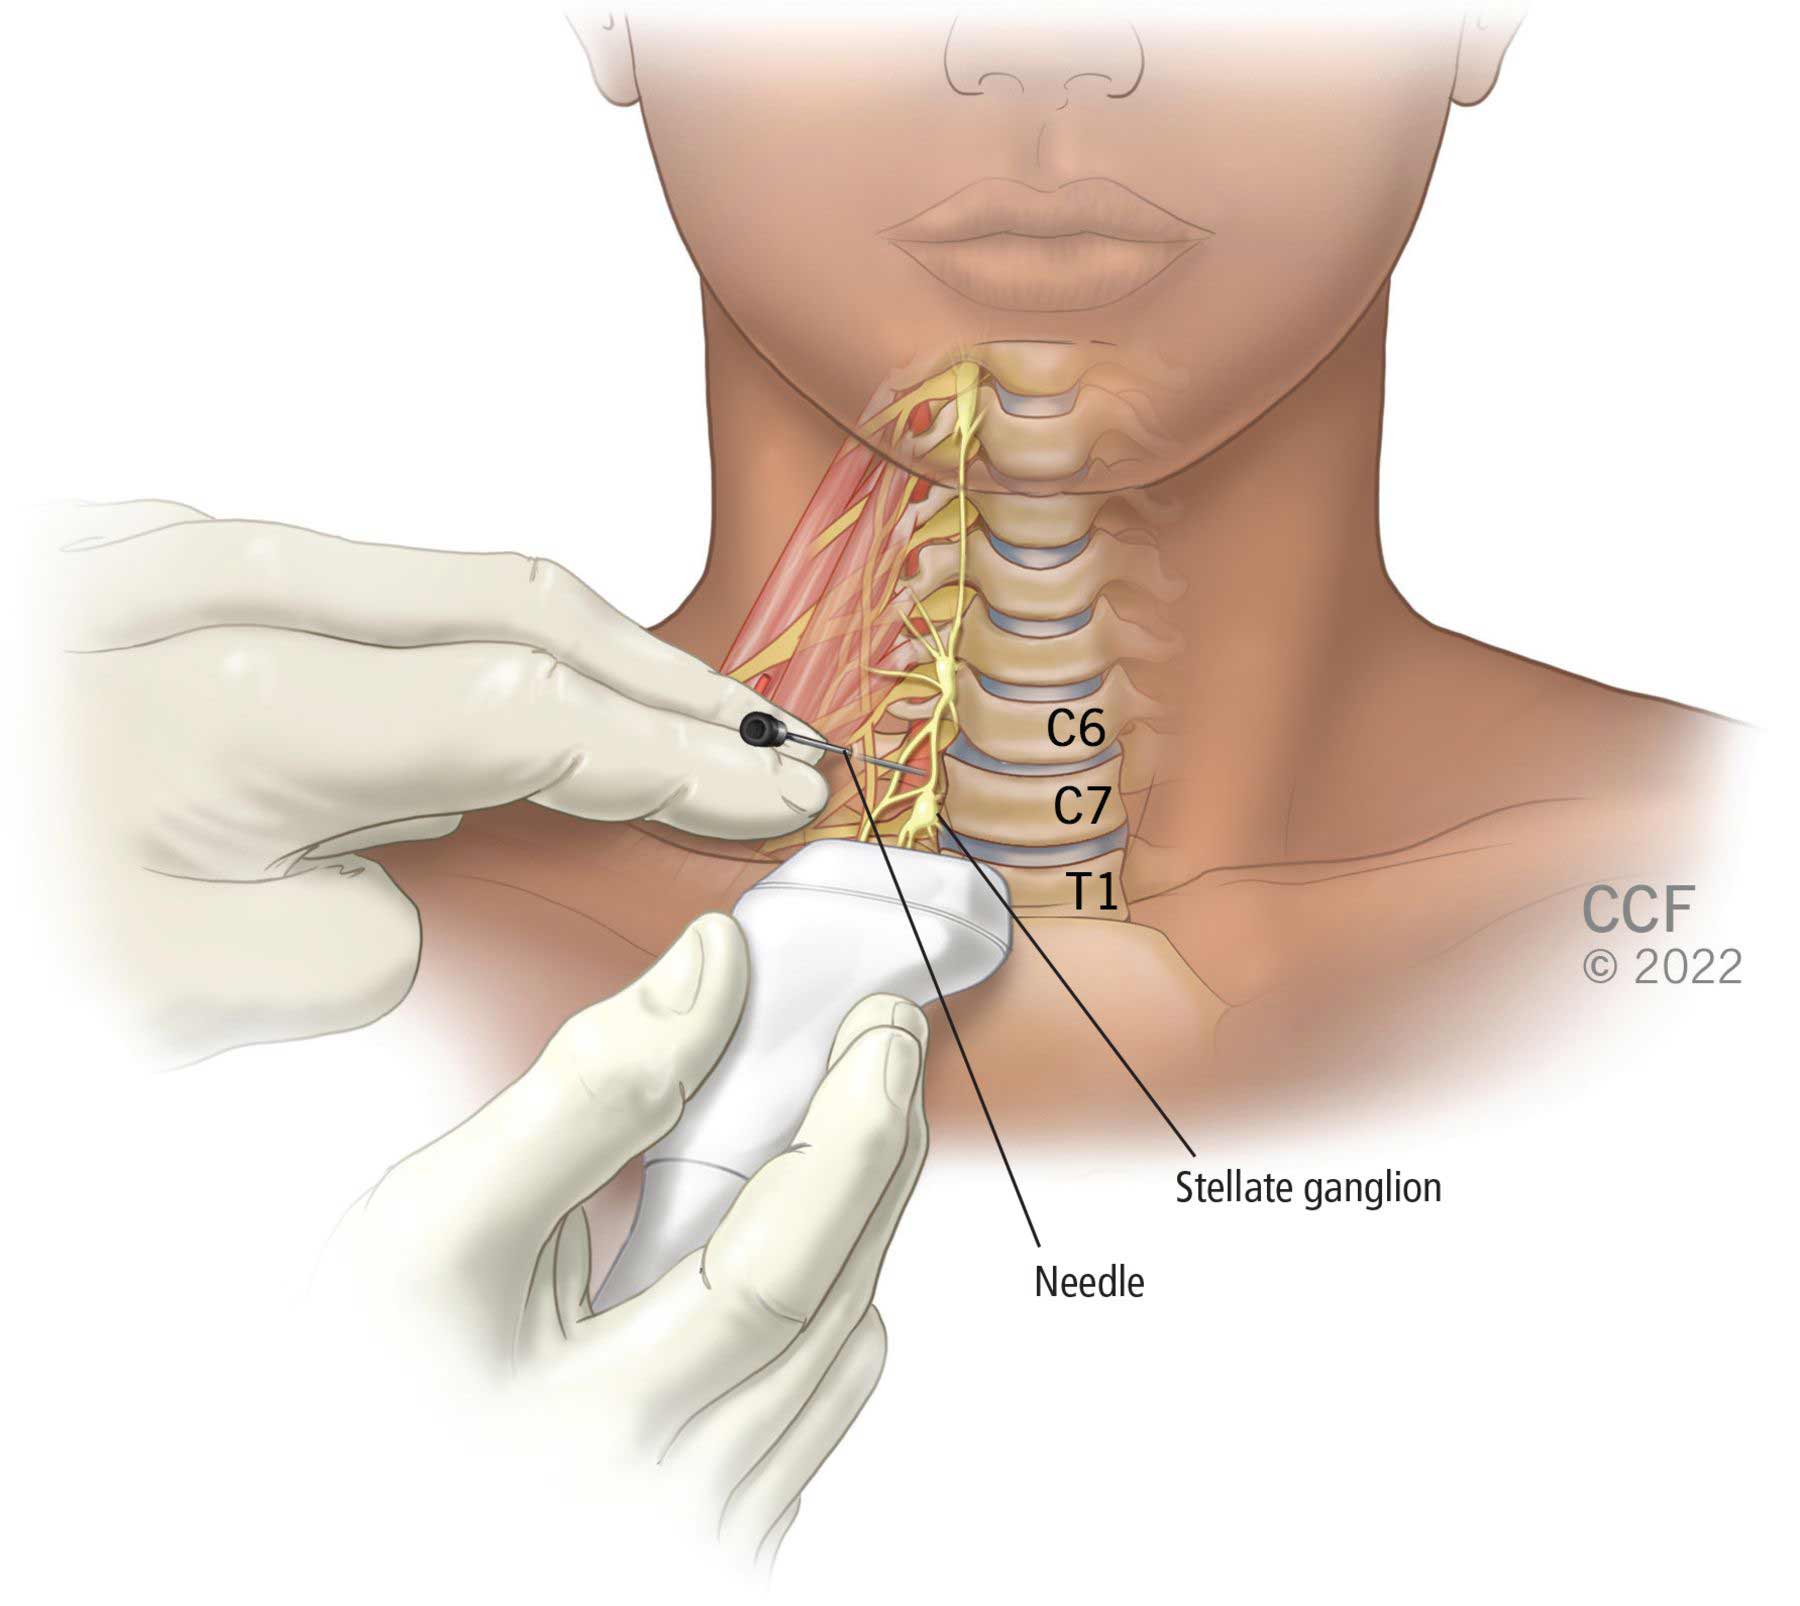 The anatomical location of the stellate ganglion is on the front side of the neck next to the C7 and T1 vertebrae.